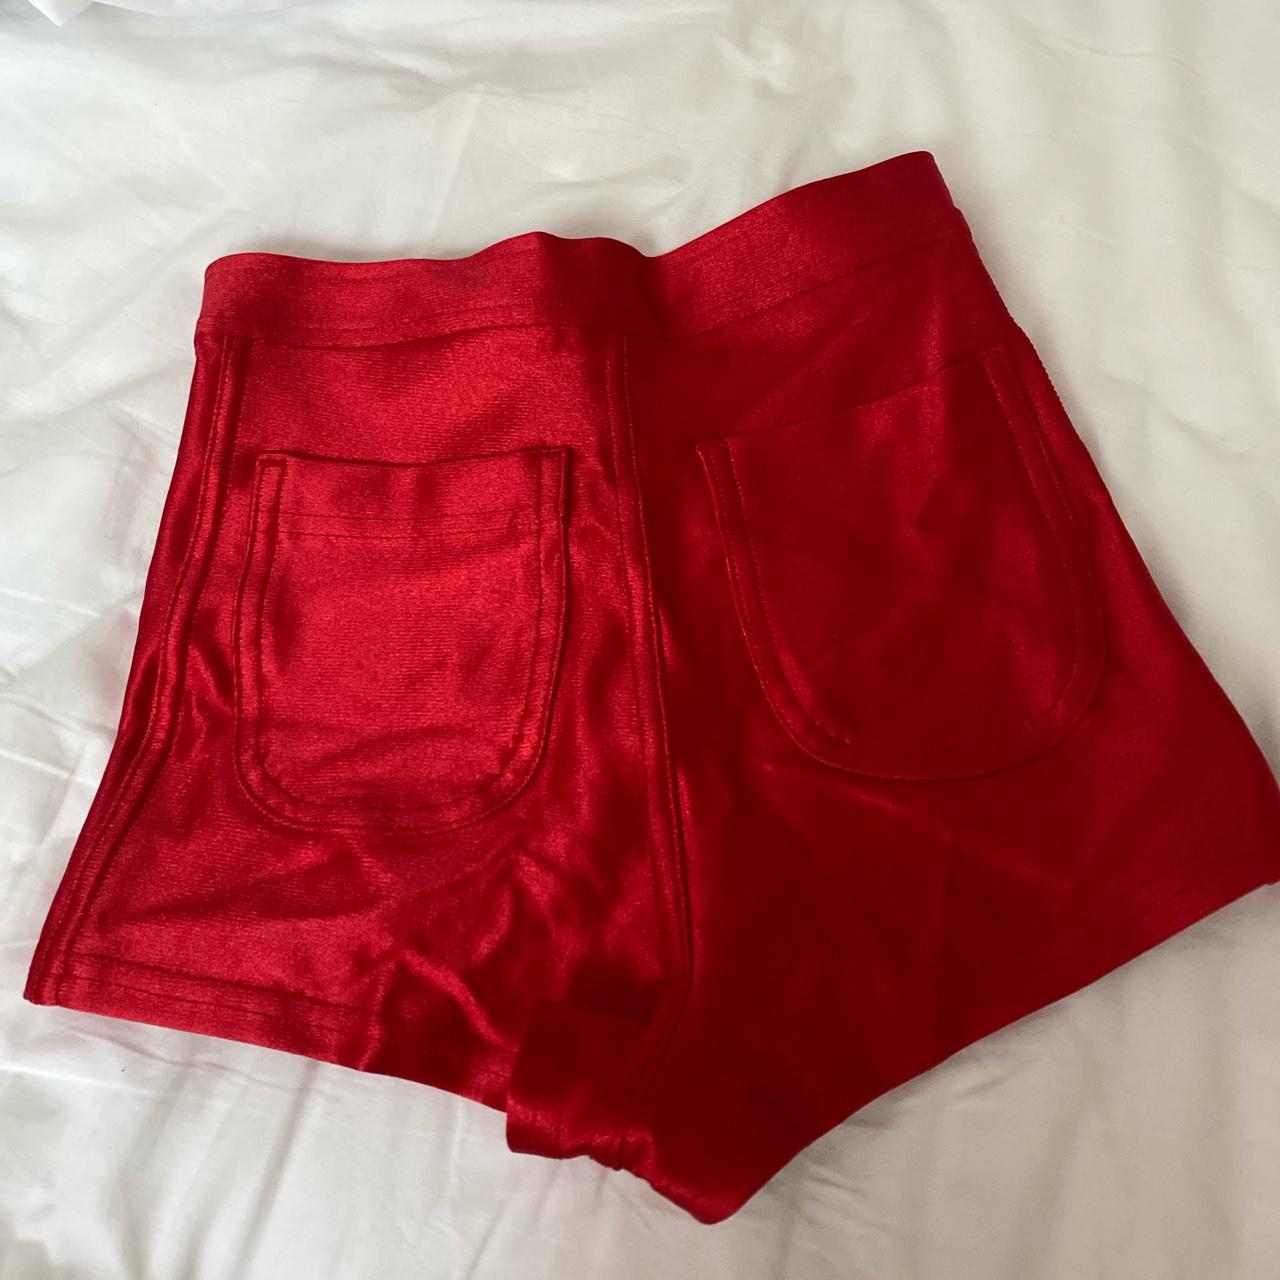 Genuine Authentic HOT American Apparel Disco Shorts Red S